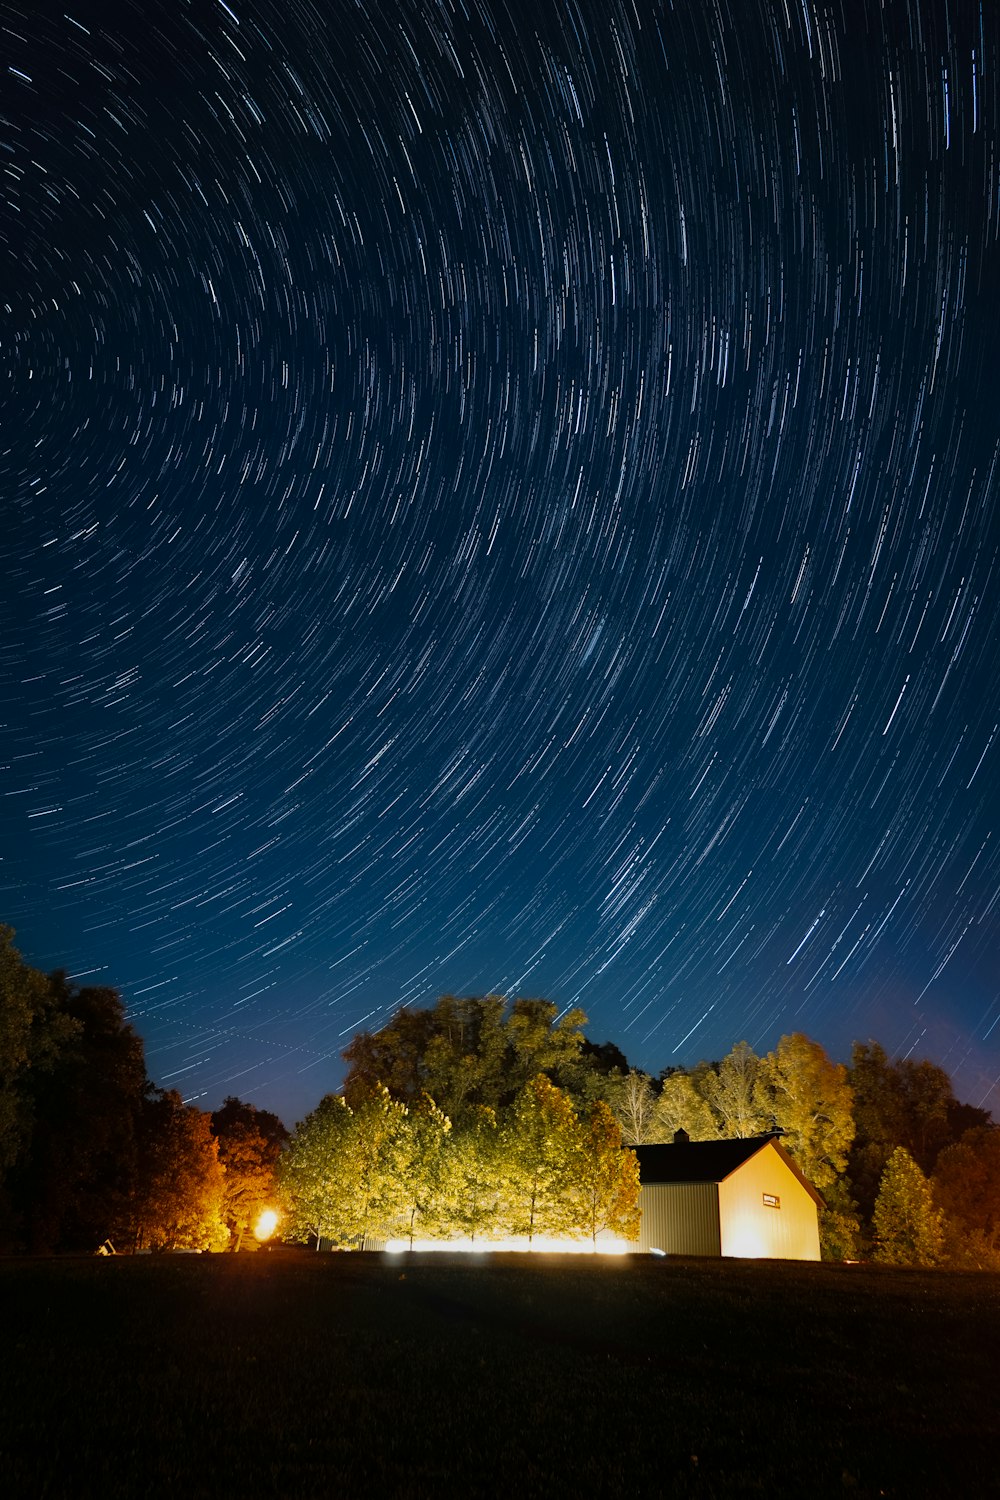 the night sky with a house and trees in the foreground